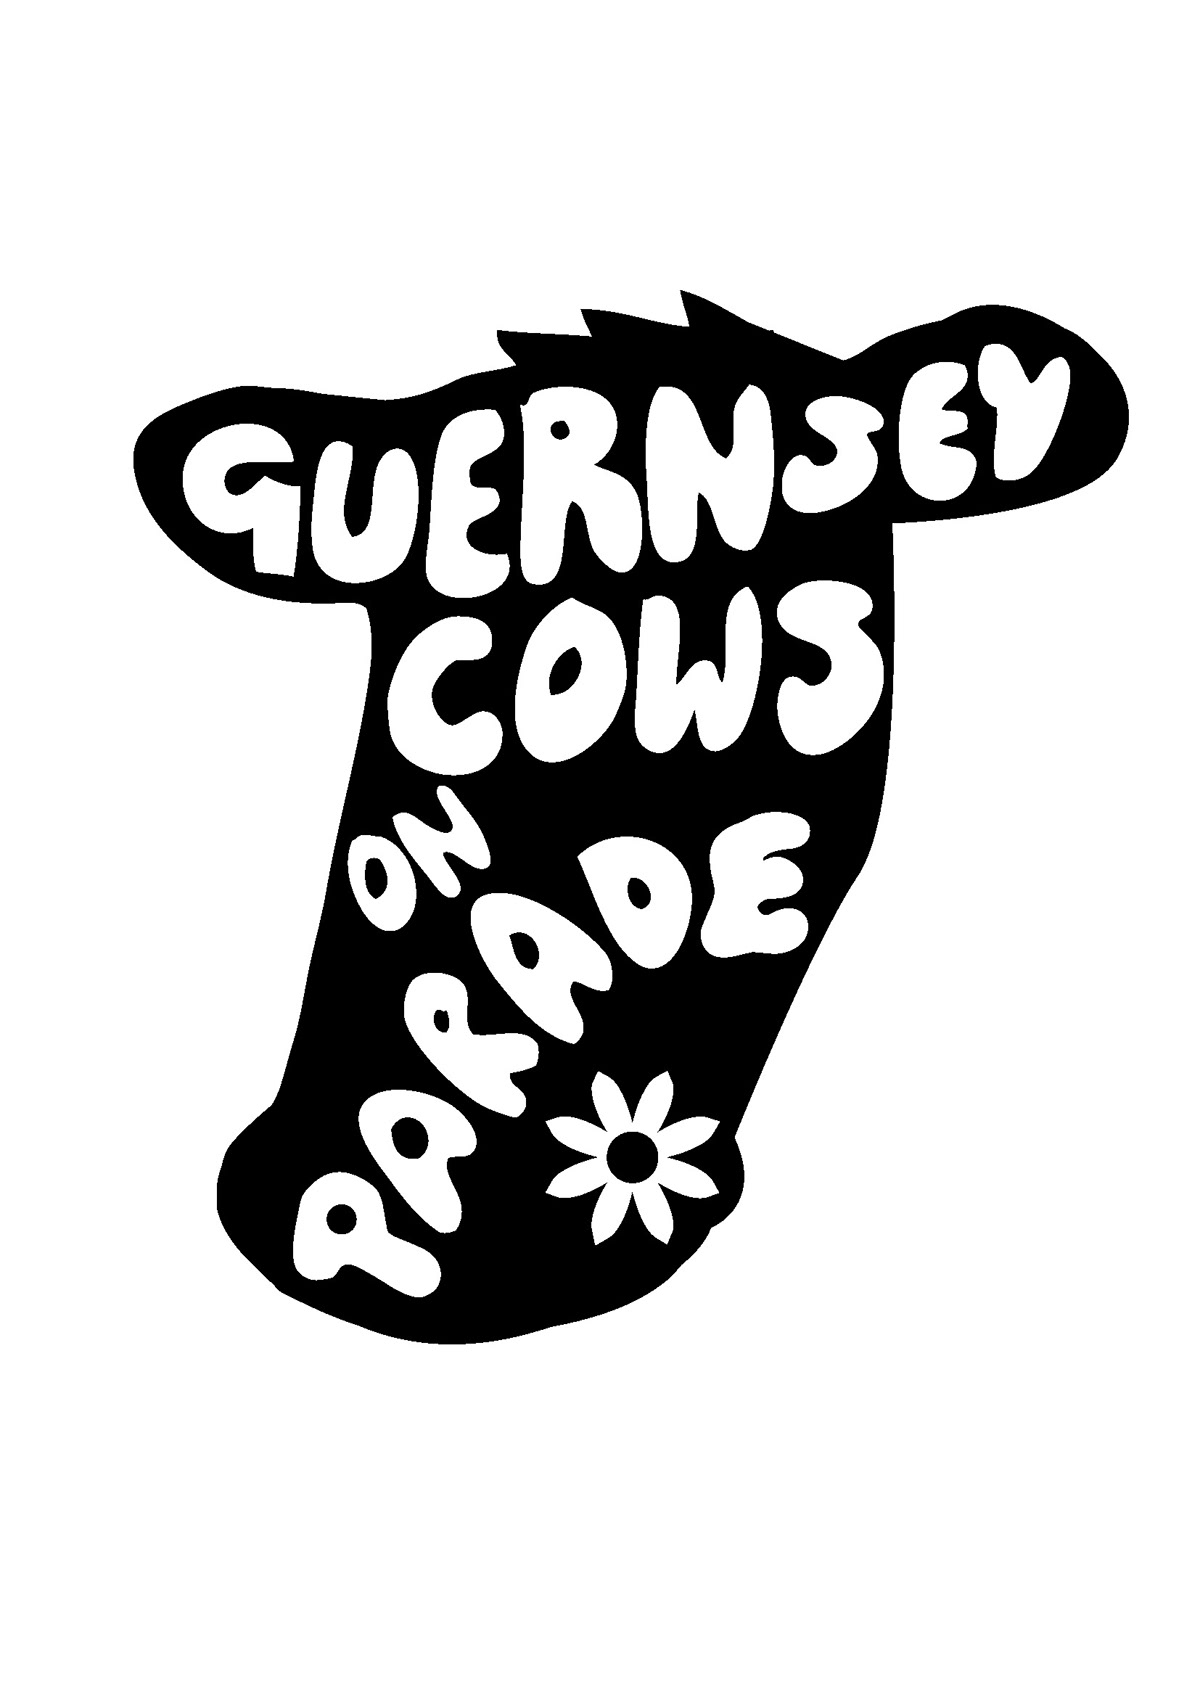 guernsey galp adult literacy dyslexia cows Community Project